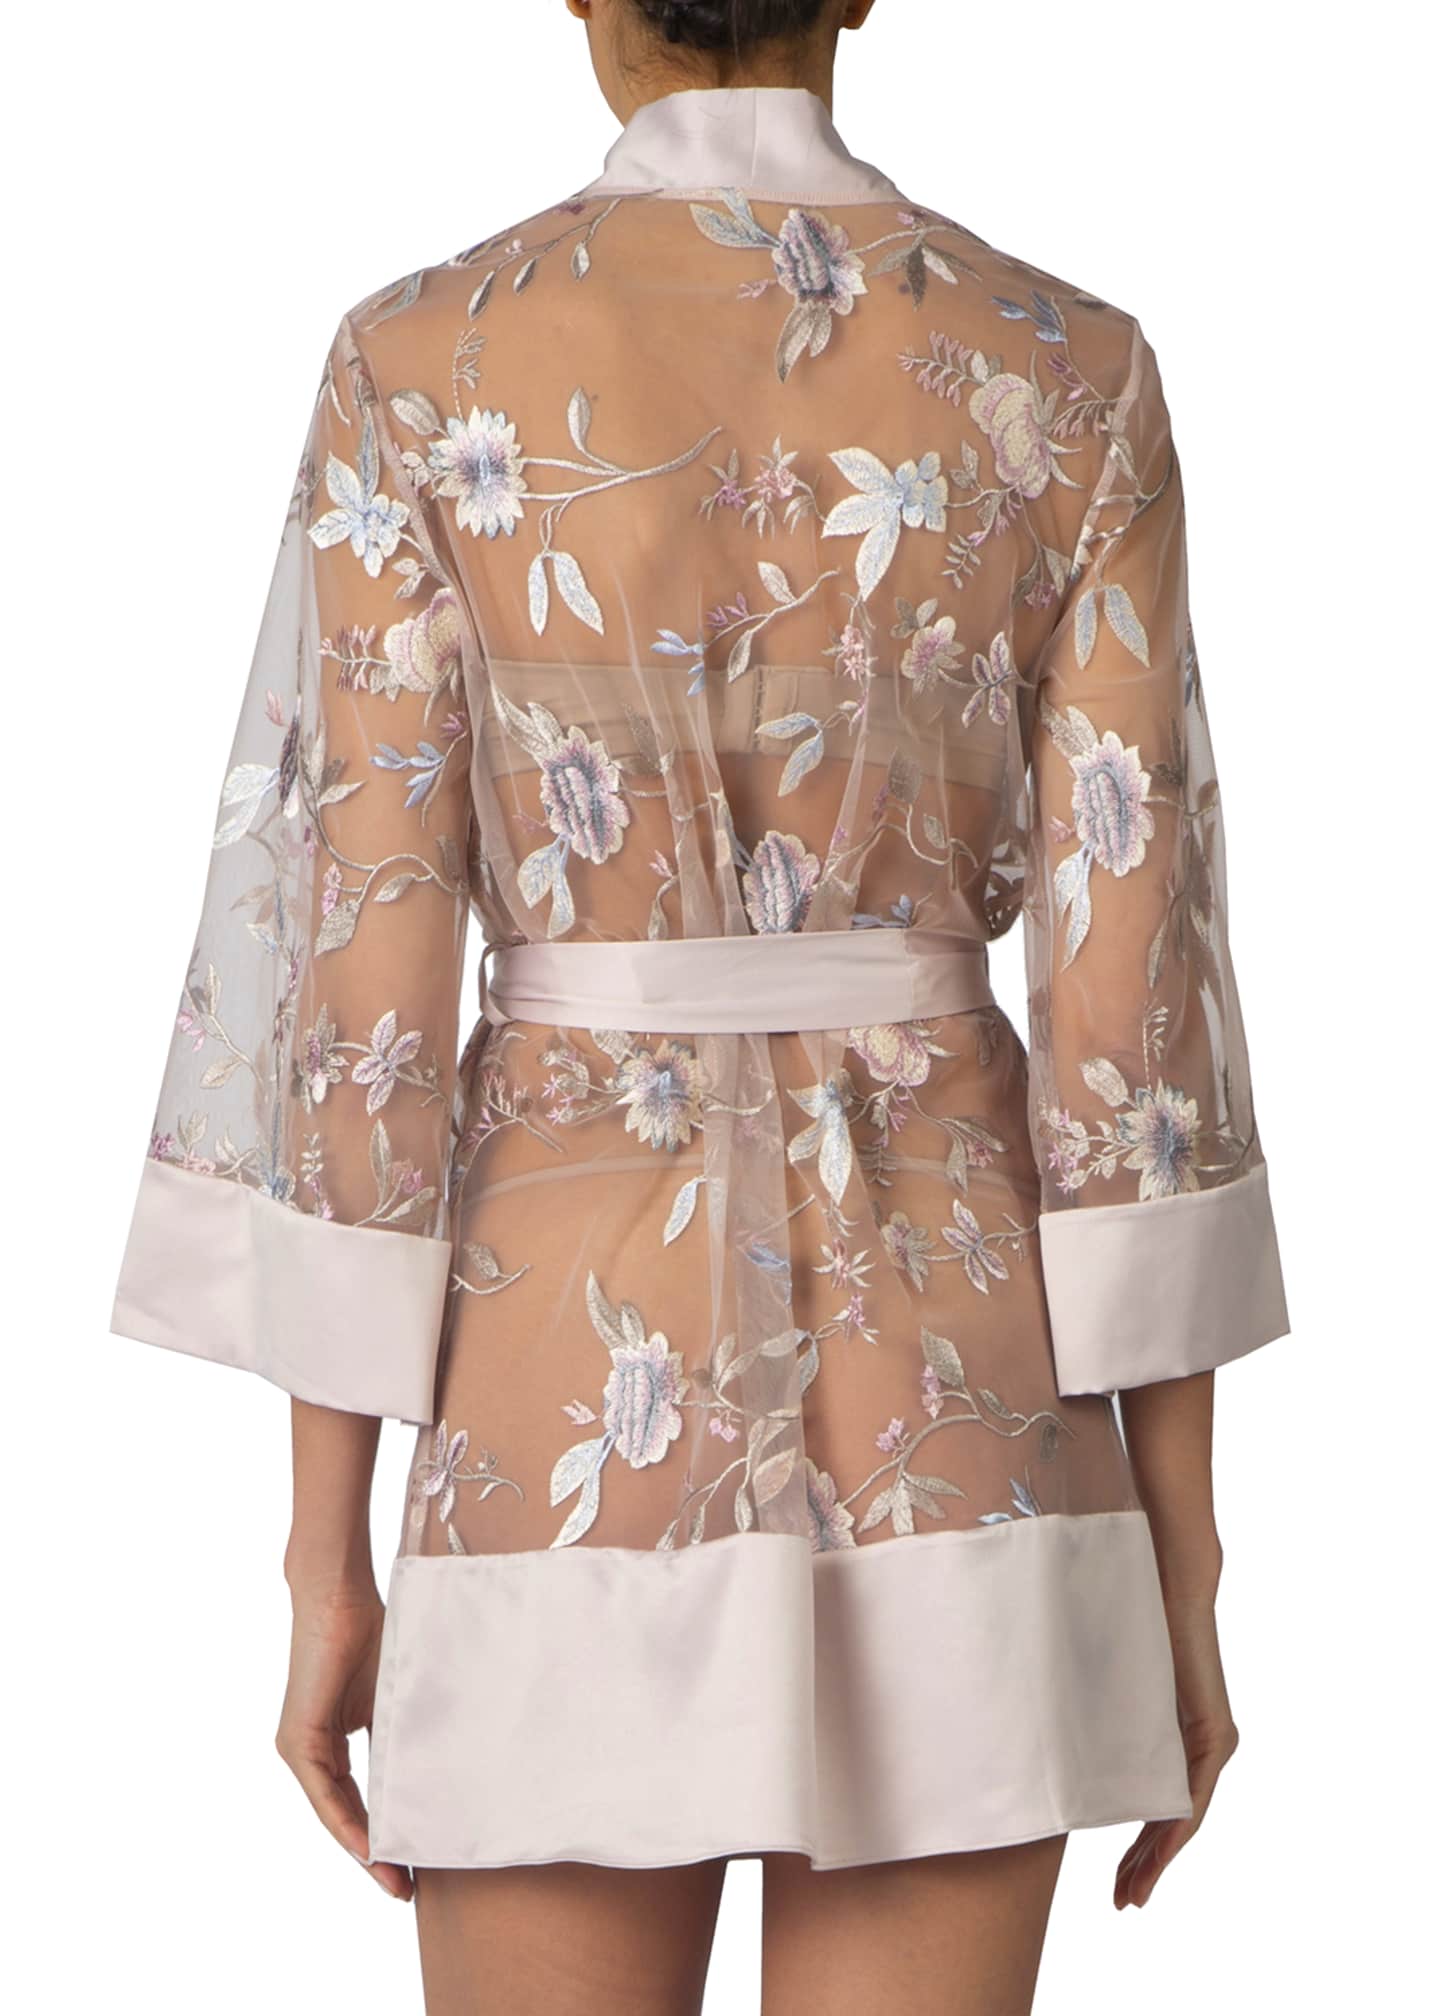 Rya Collection Stunning Floral Embroidered Cover Up Robe Bergdorf Goodman